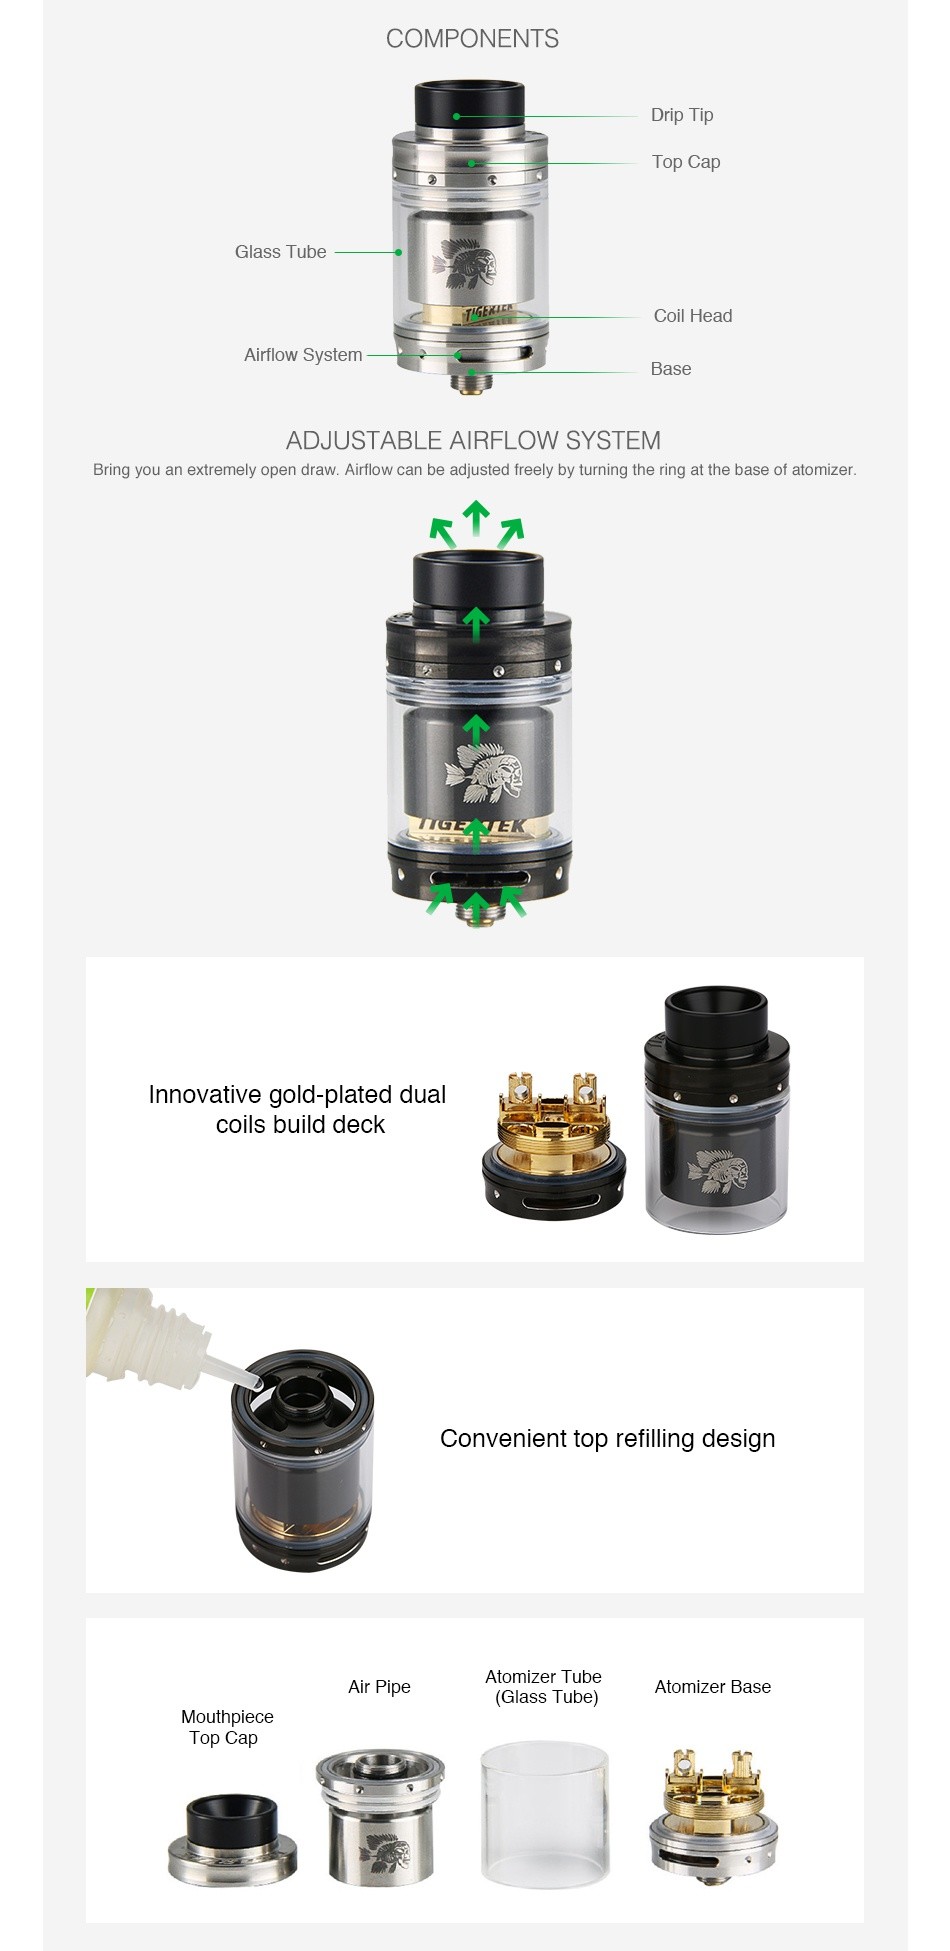 Tigertek Mermaid RTA 3.5ml COMPONENTS Top Ca Glass Tube Coil Head rflow System ADJUSTABLE AIRFLOW SYSTEM Bring you an extremely open draw  Airflow can be adjusted freely by turning the ring at the base of atomizer RZ  E nnovative gold plated dual coils build deck Convenient top refilling design Atomizer tube  Glass Tub Mouthpiece Top Cap